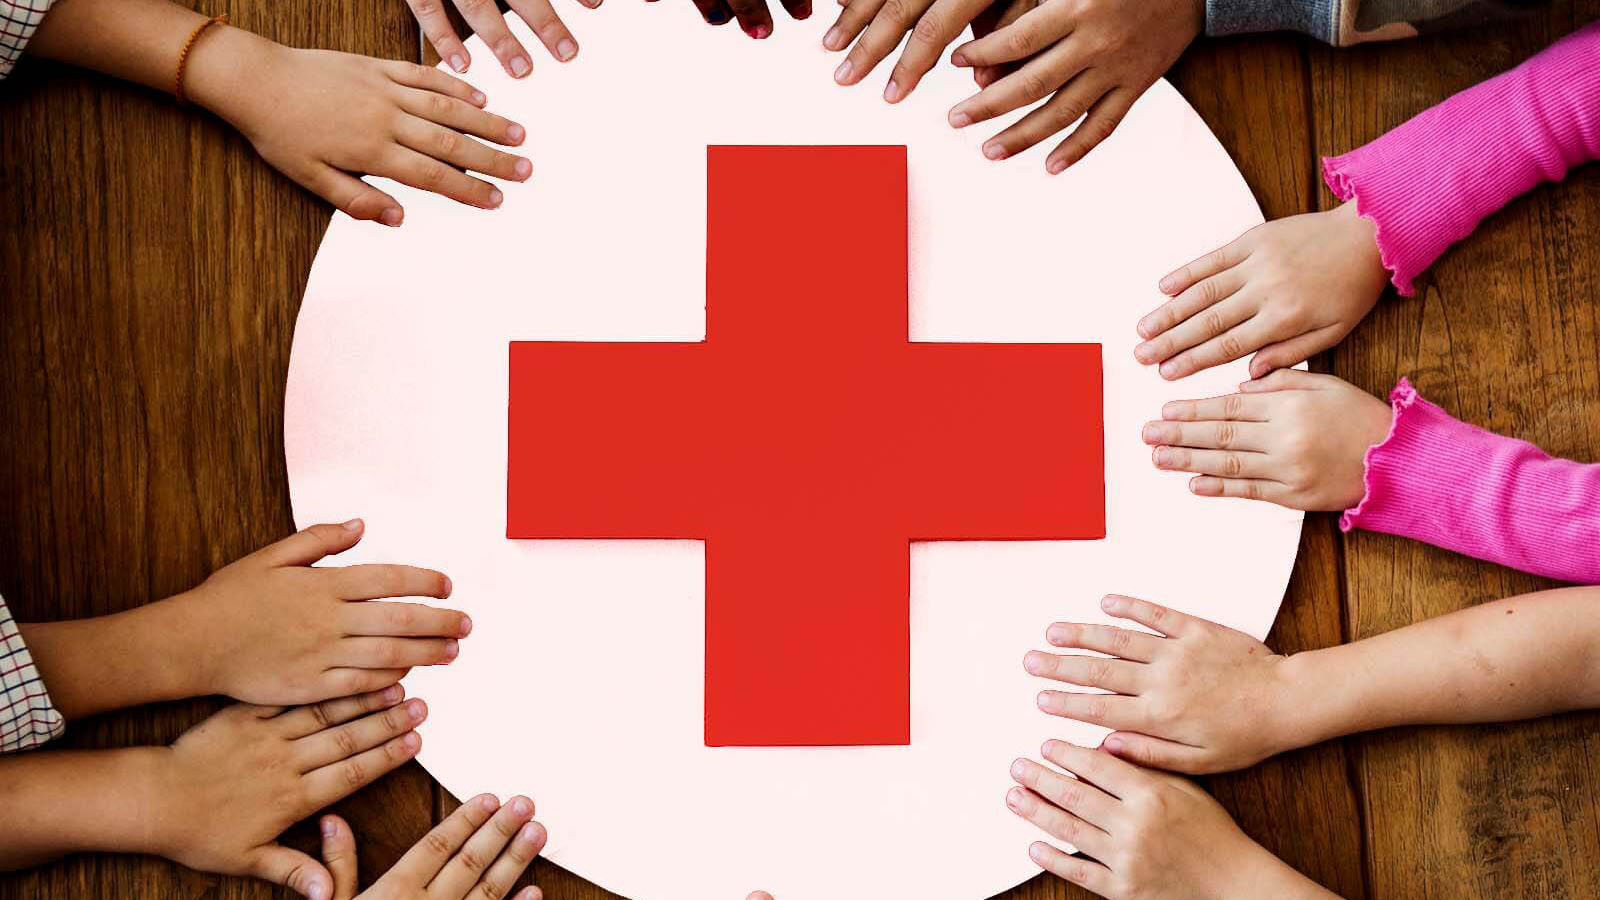 Helping Others Through The American Red Cross Club News Center